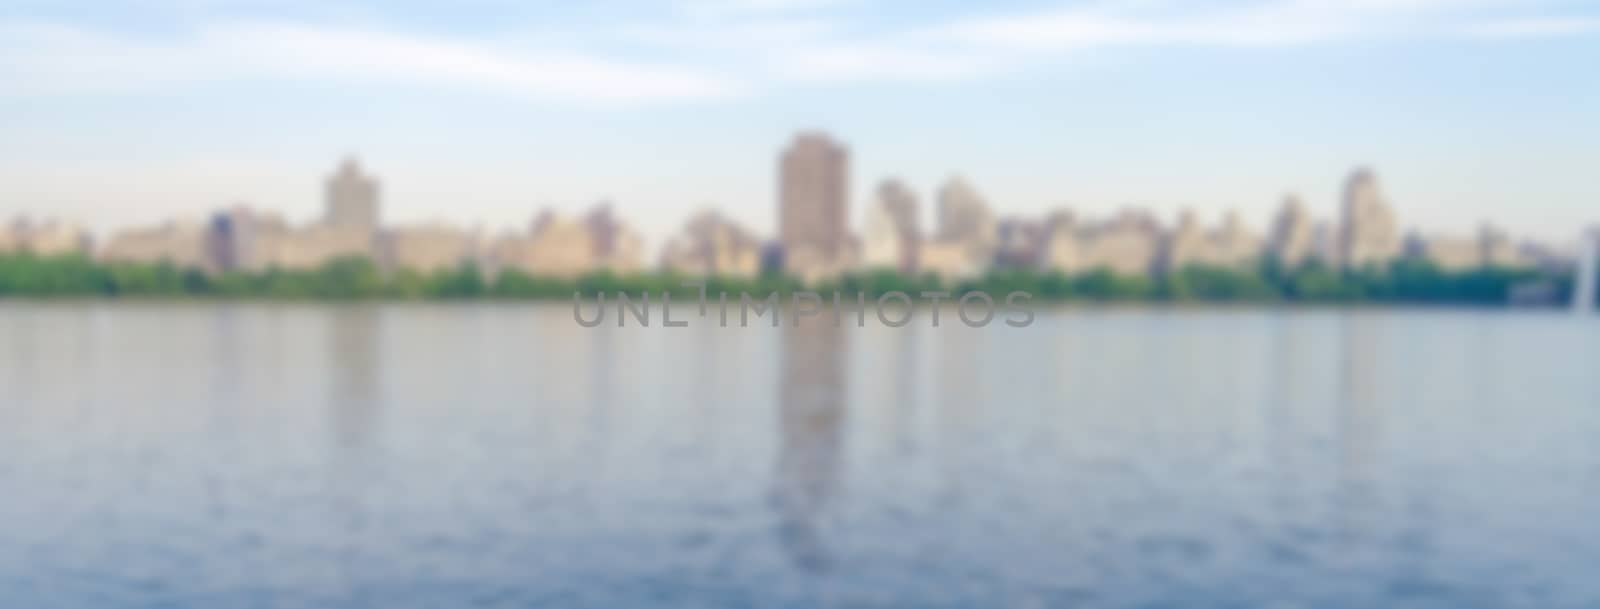 Defocused background with Reservoir in Central Park, New York Ci by marcorubino